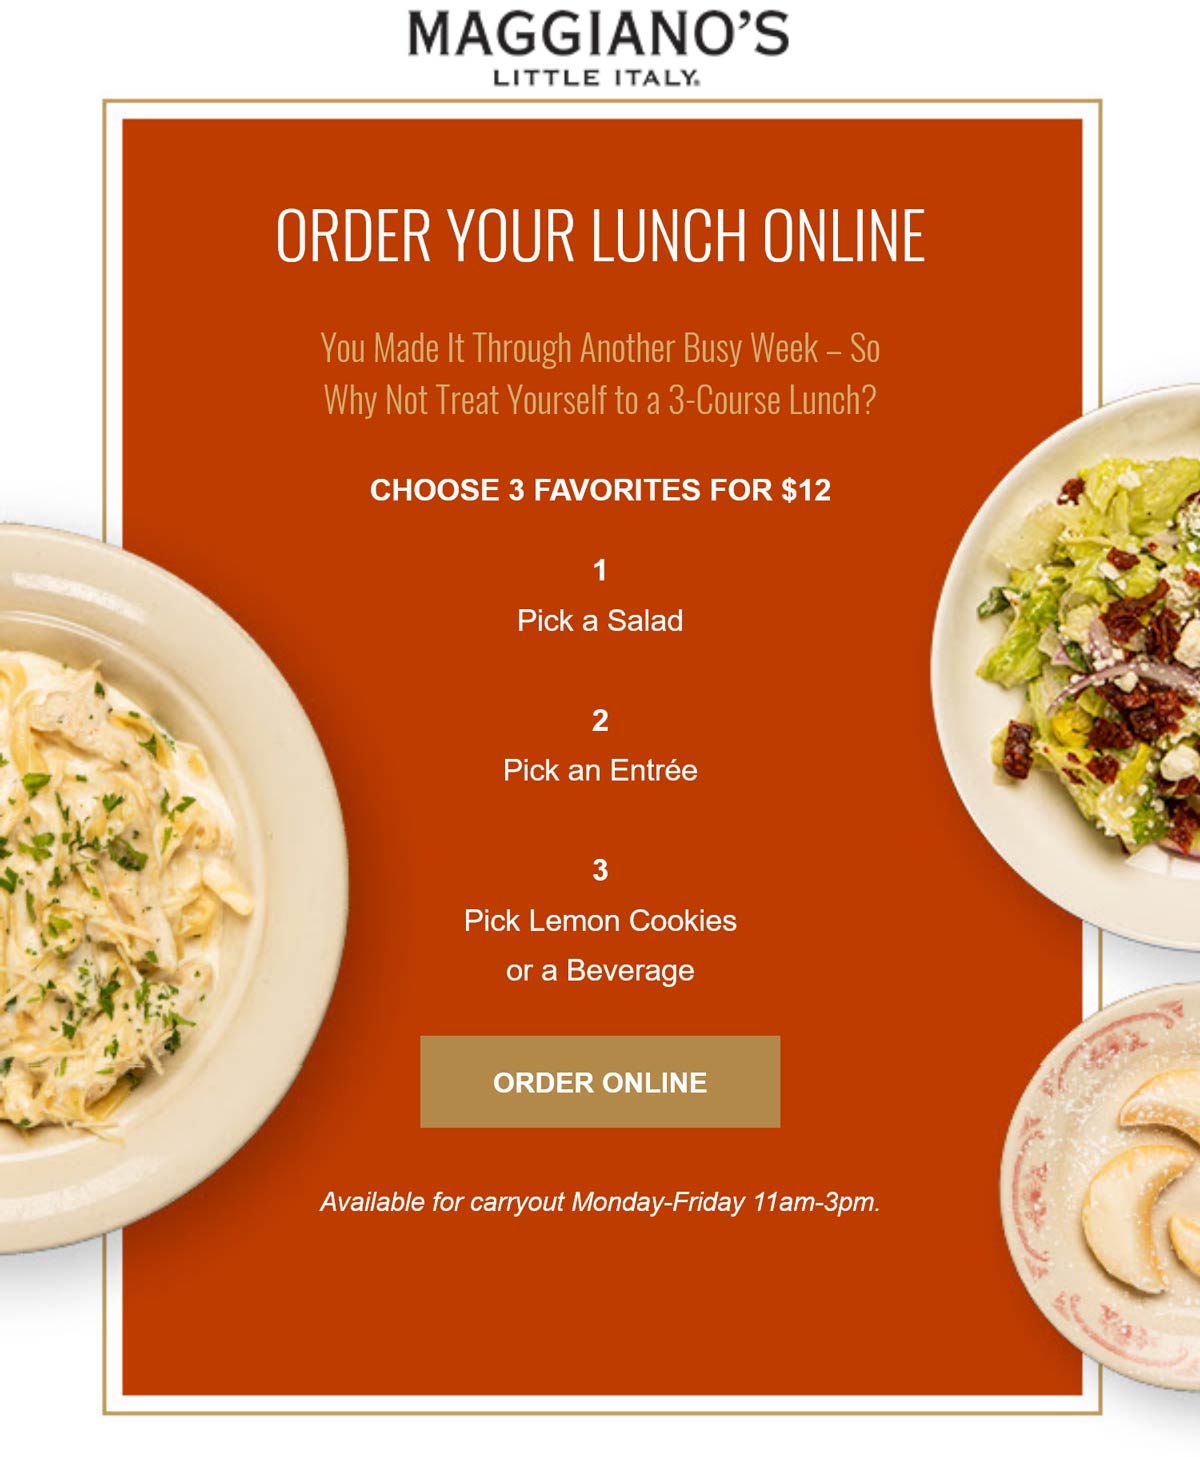 Maggianos Little Italy coupons & promo code for [December 2022]